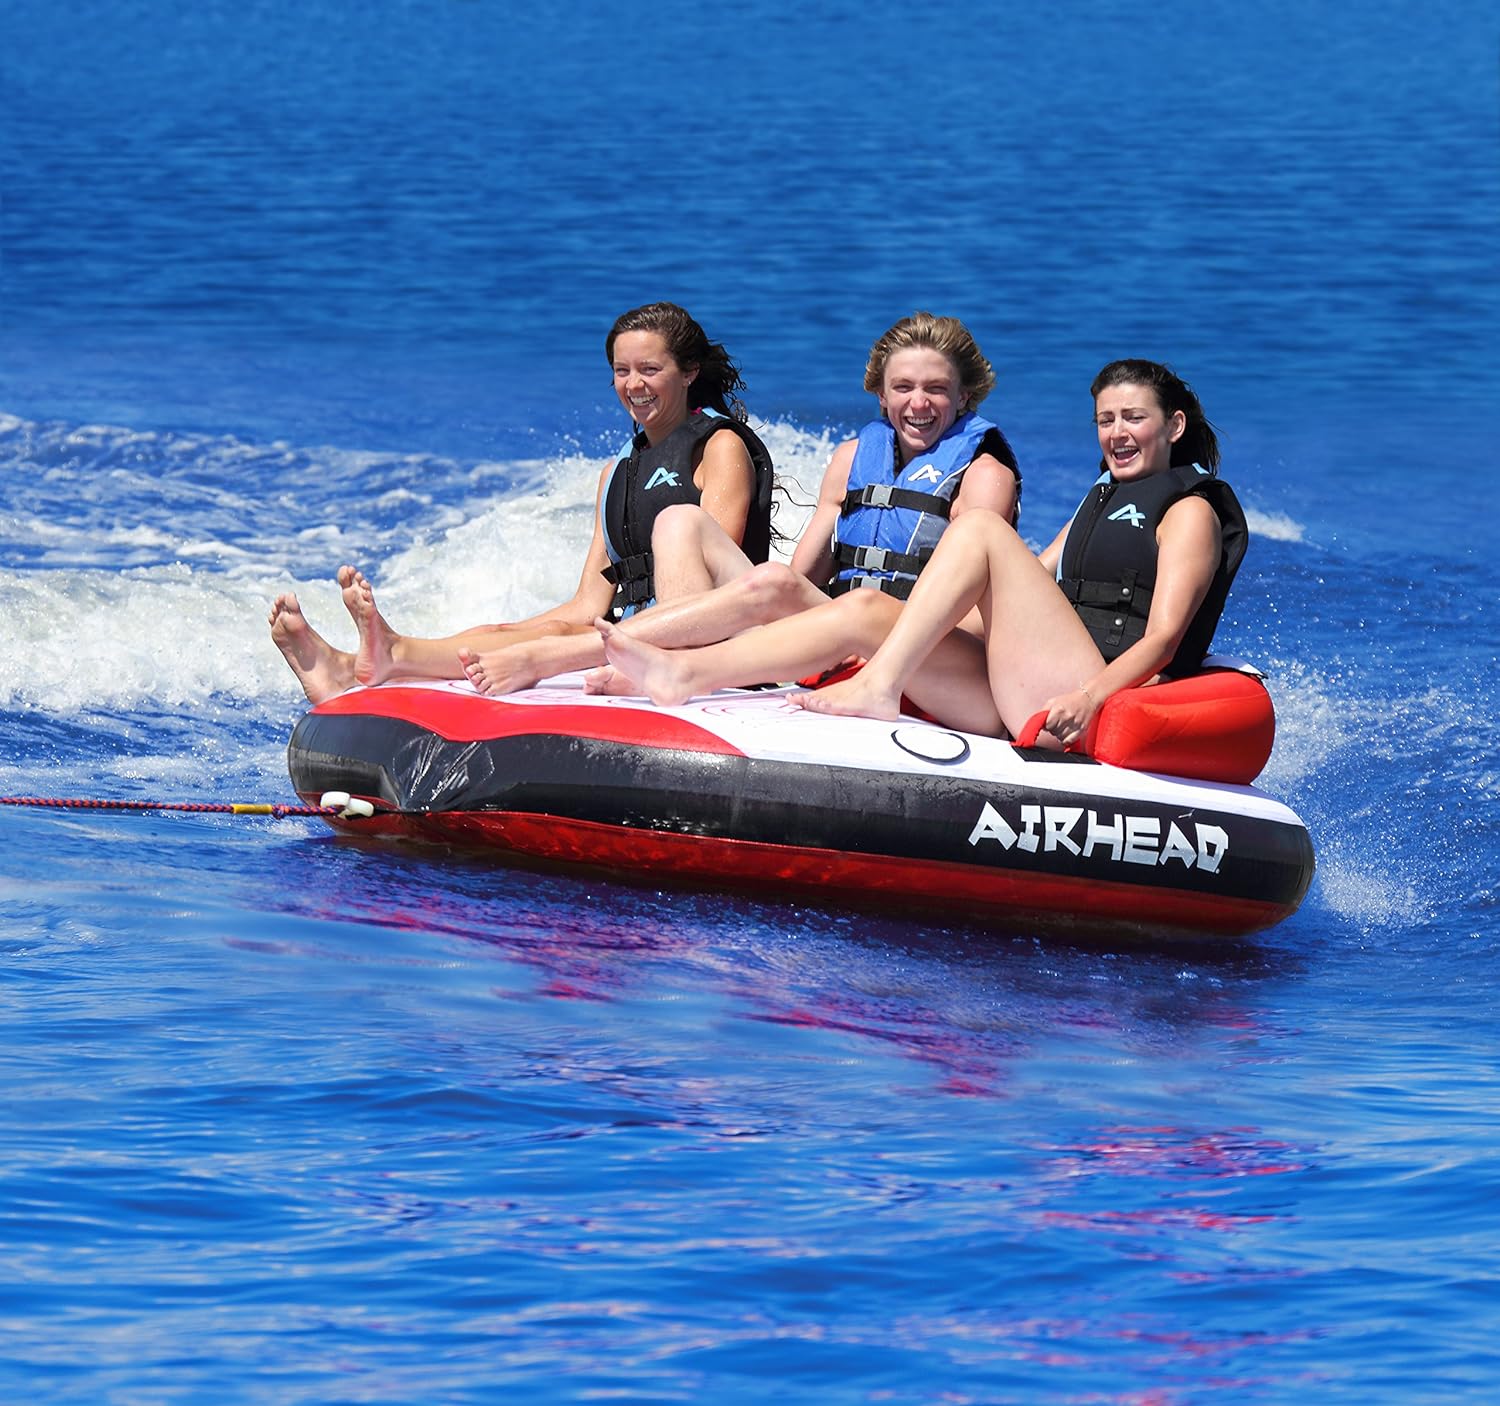 Airhead Riptide 3 Towable Tube for Boating, 1-3 Riders